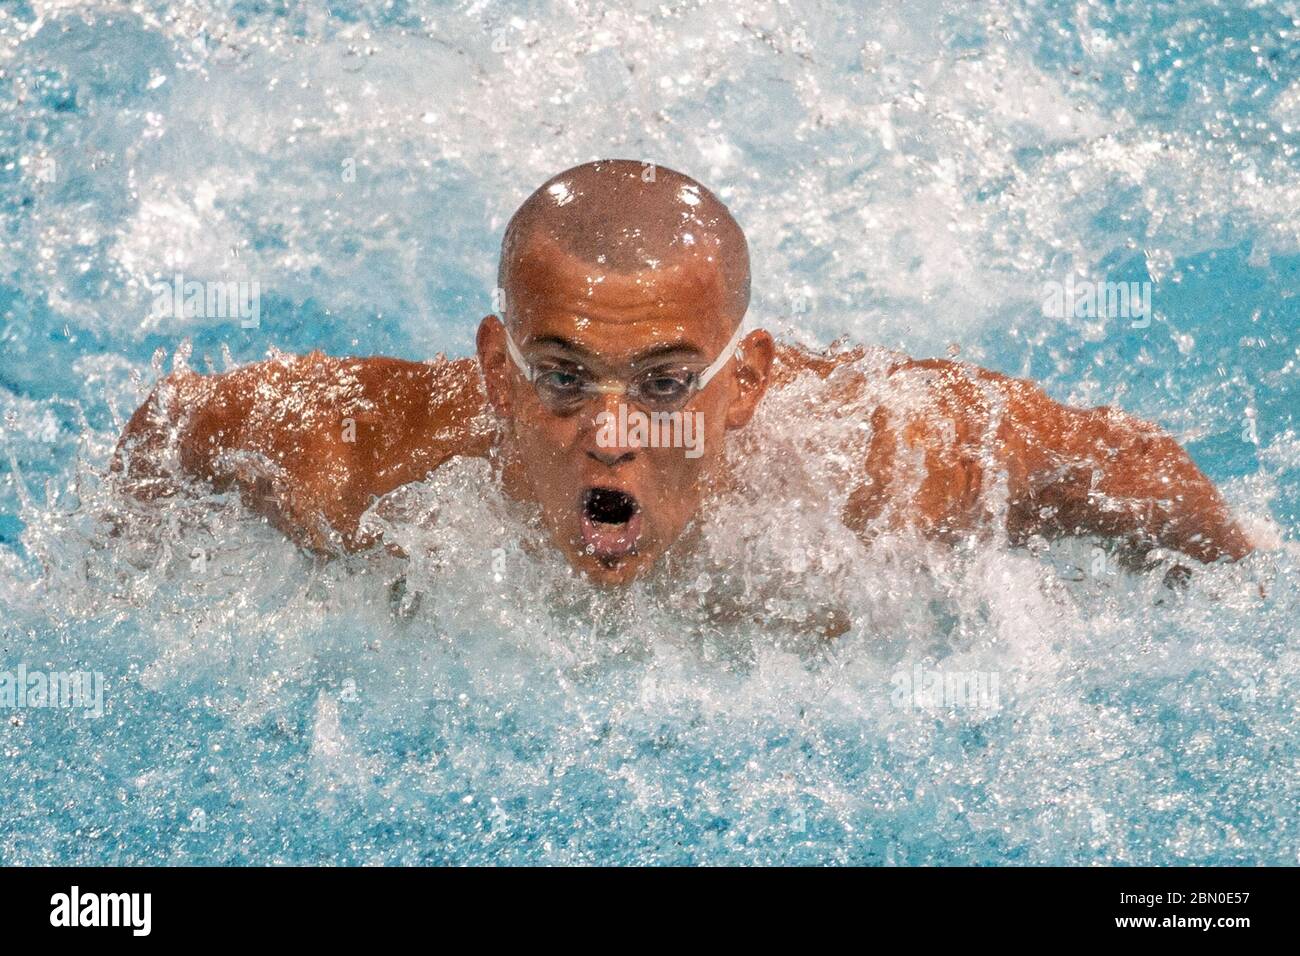 László Cseh ( HUN) competes in the Men's 200 metre individual medley  semifinals at the 2004 Olympic Summer Games, Athens. Stock Photo